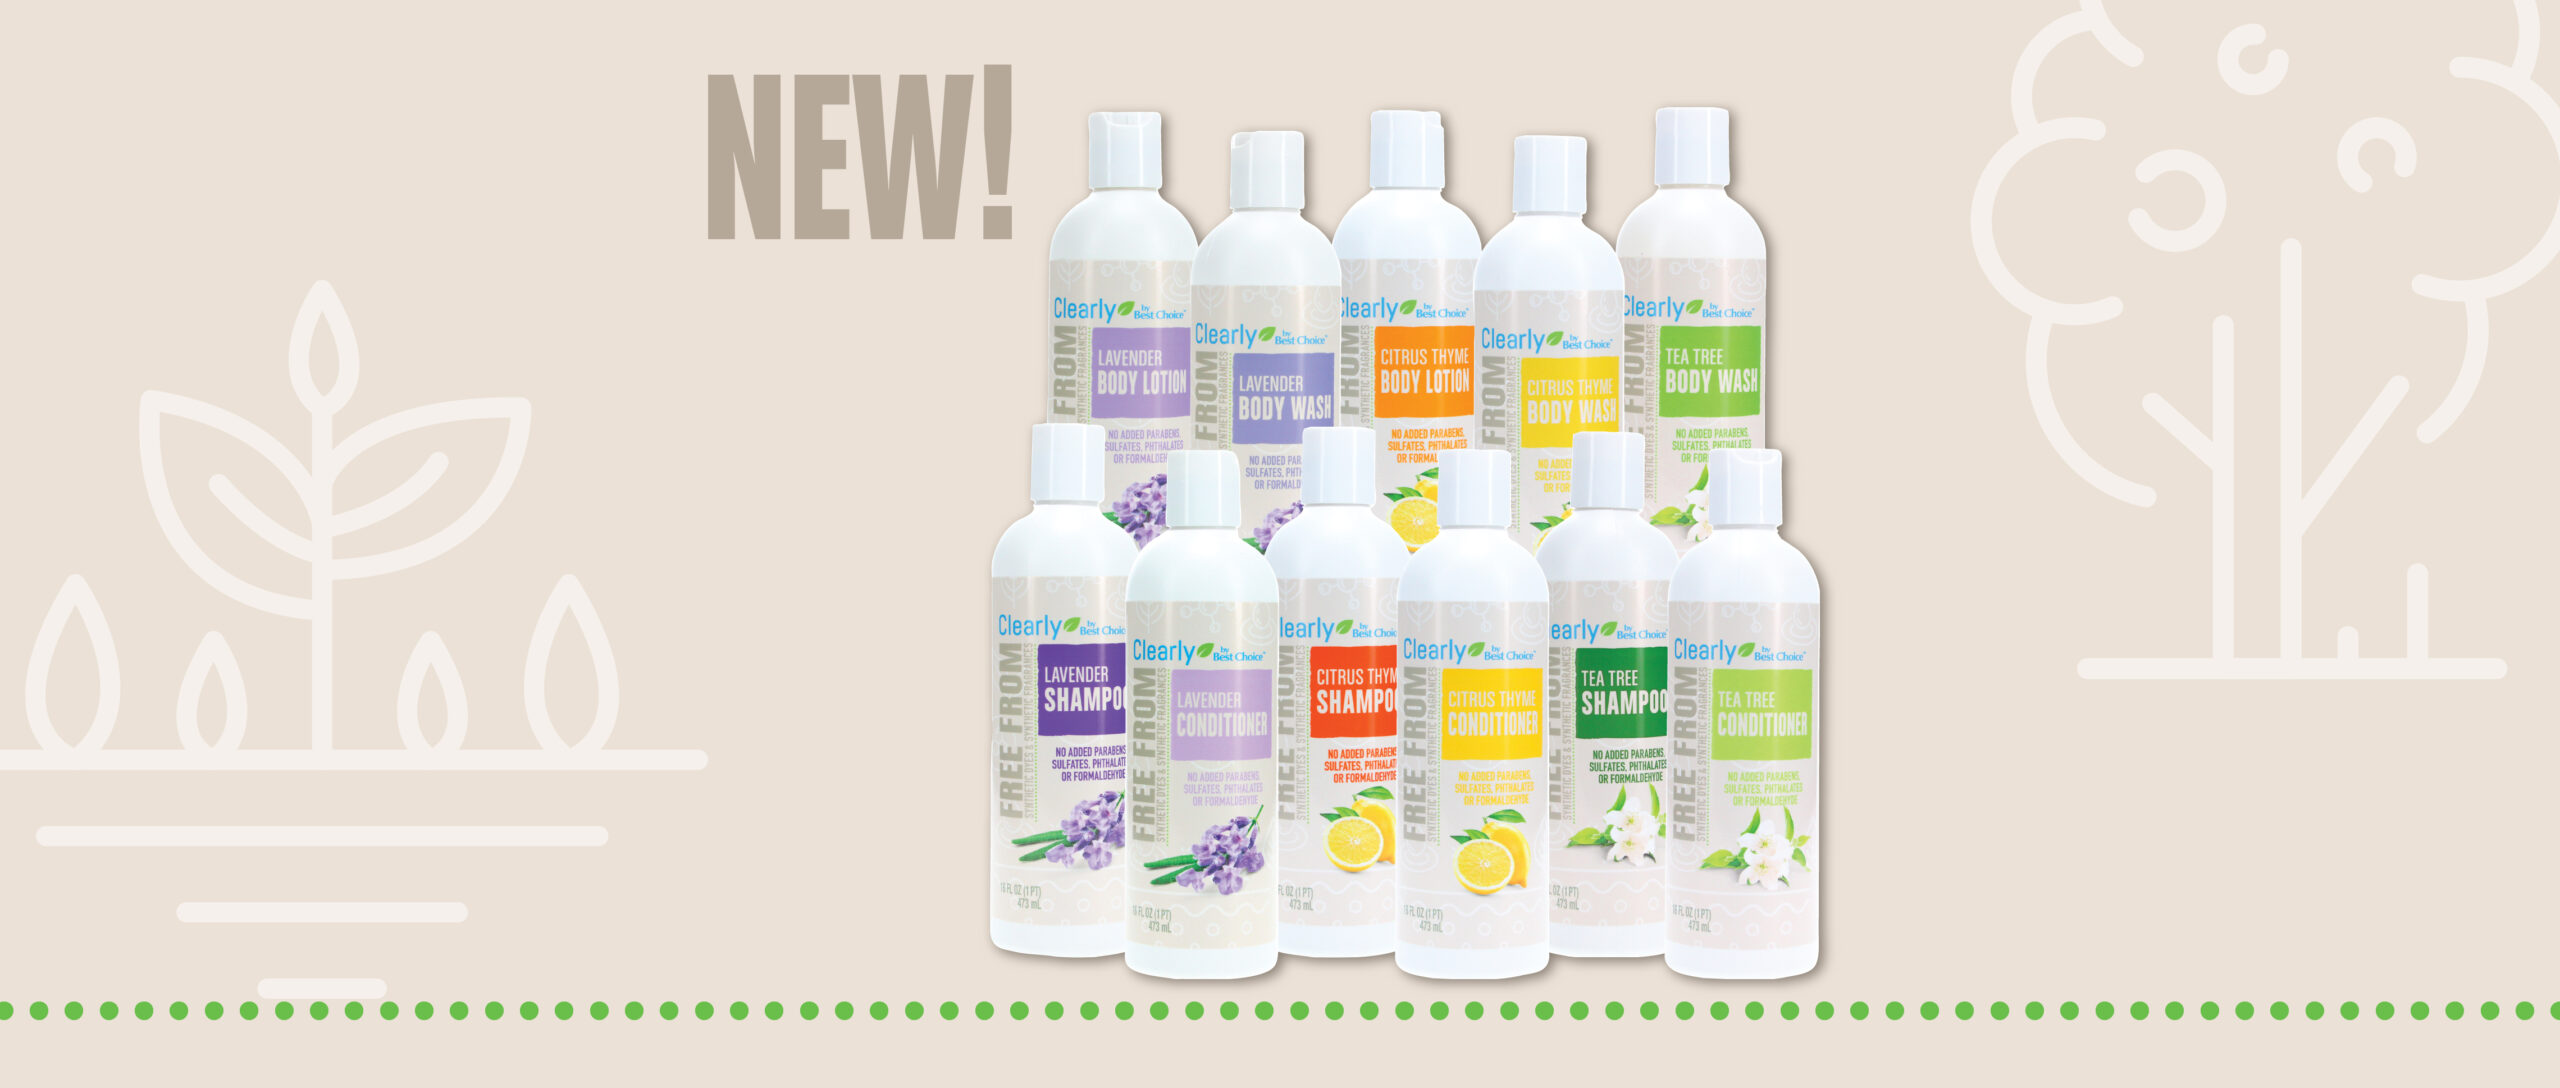 Clearly by Best Choice Launches New Hair & Body Care Line featuring shampoo, conditioner, body wash and lotion.